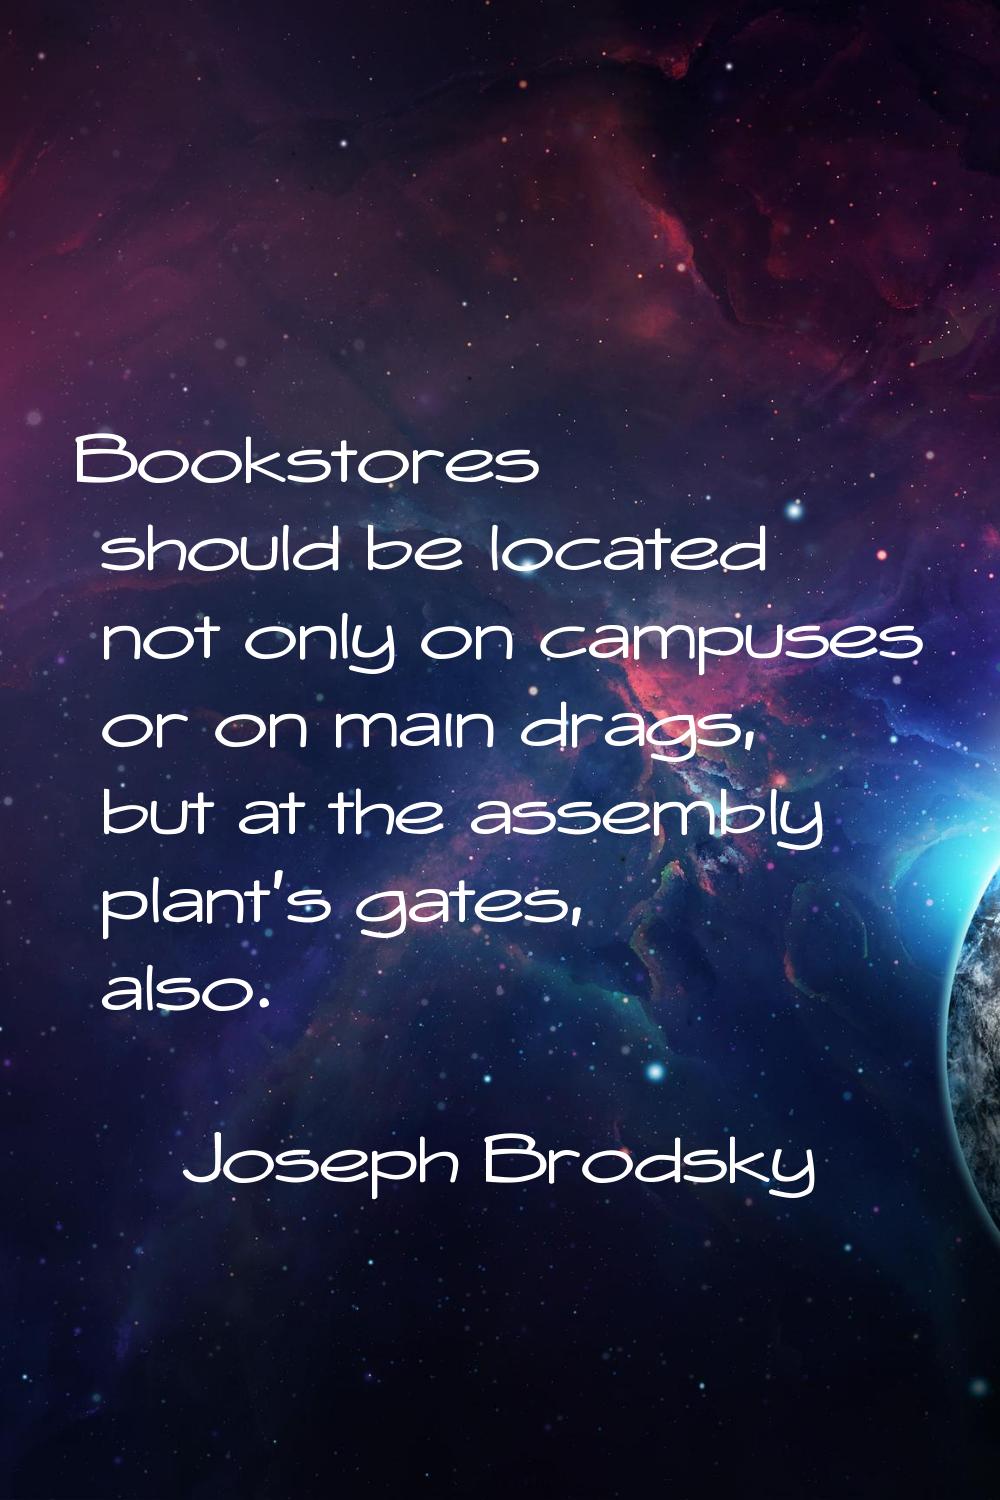 Bookstores should be located not only on campuses or on main drags, but at the assembly plant's gat